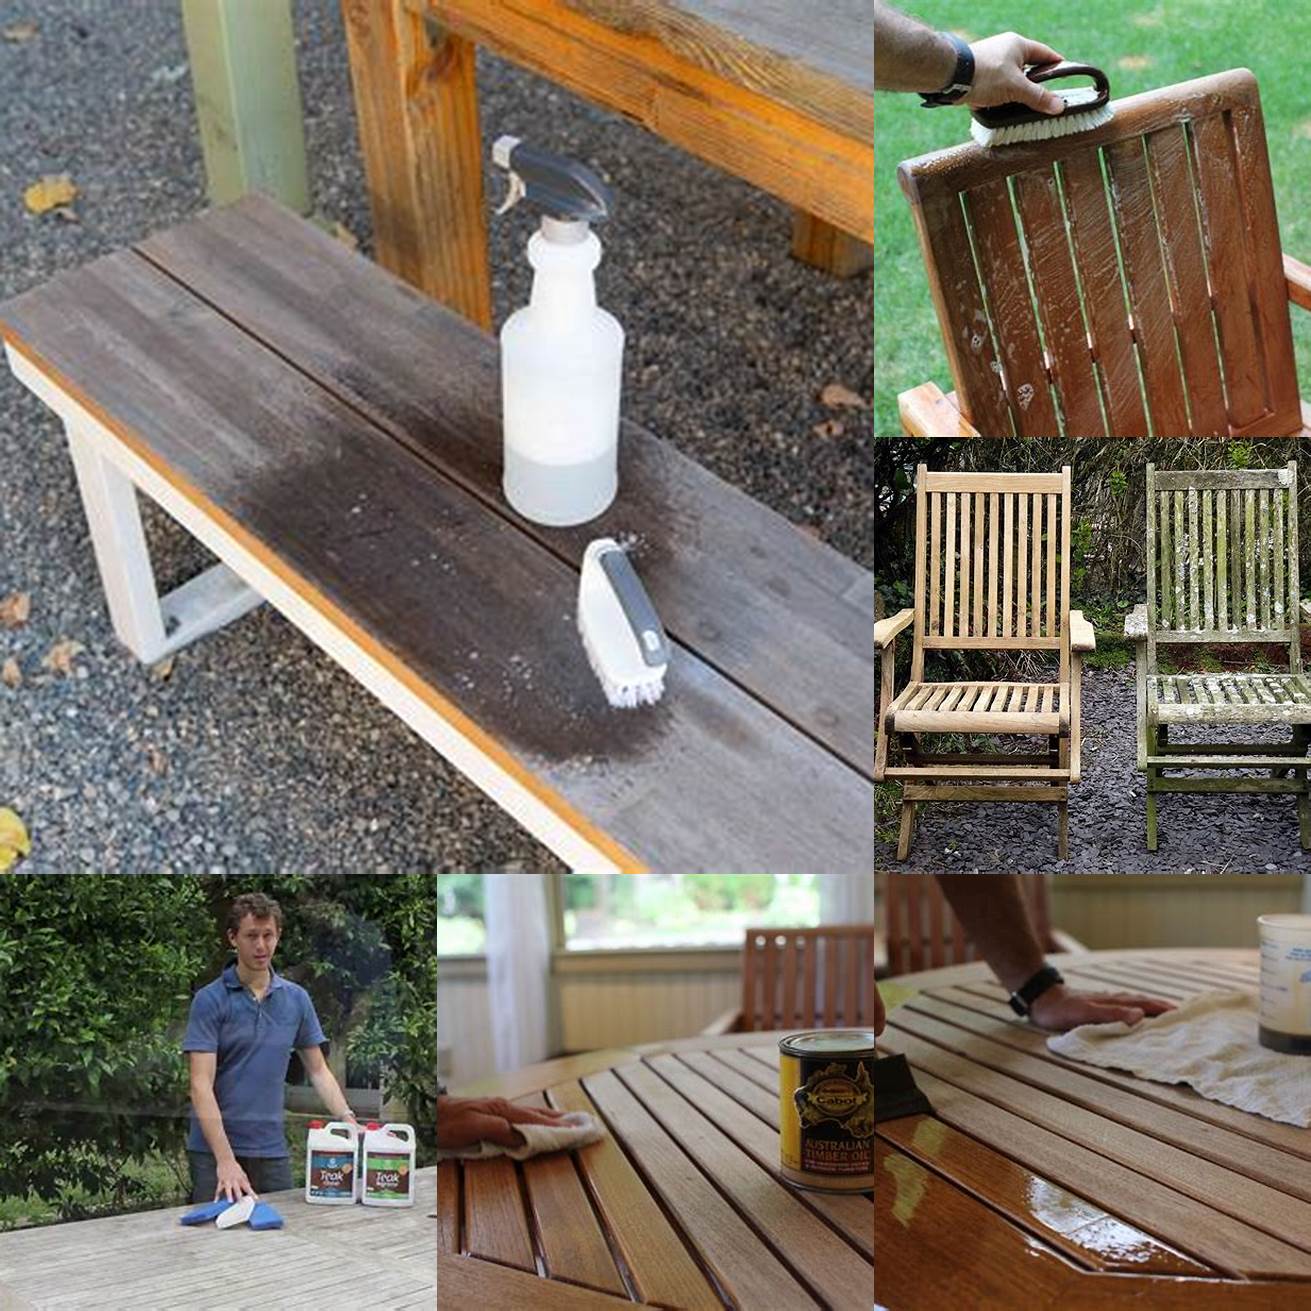 Cleaning the Teak